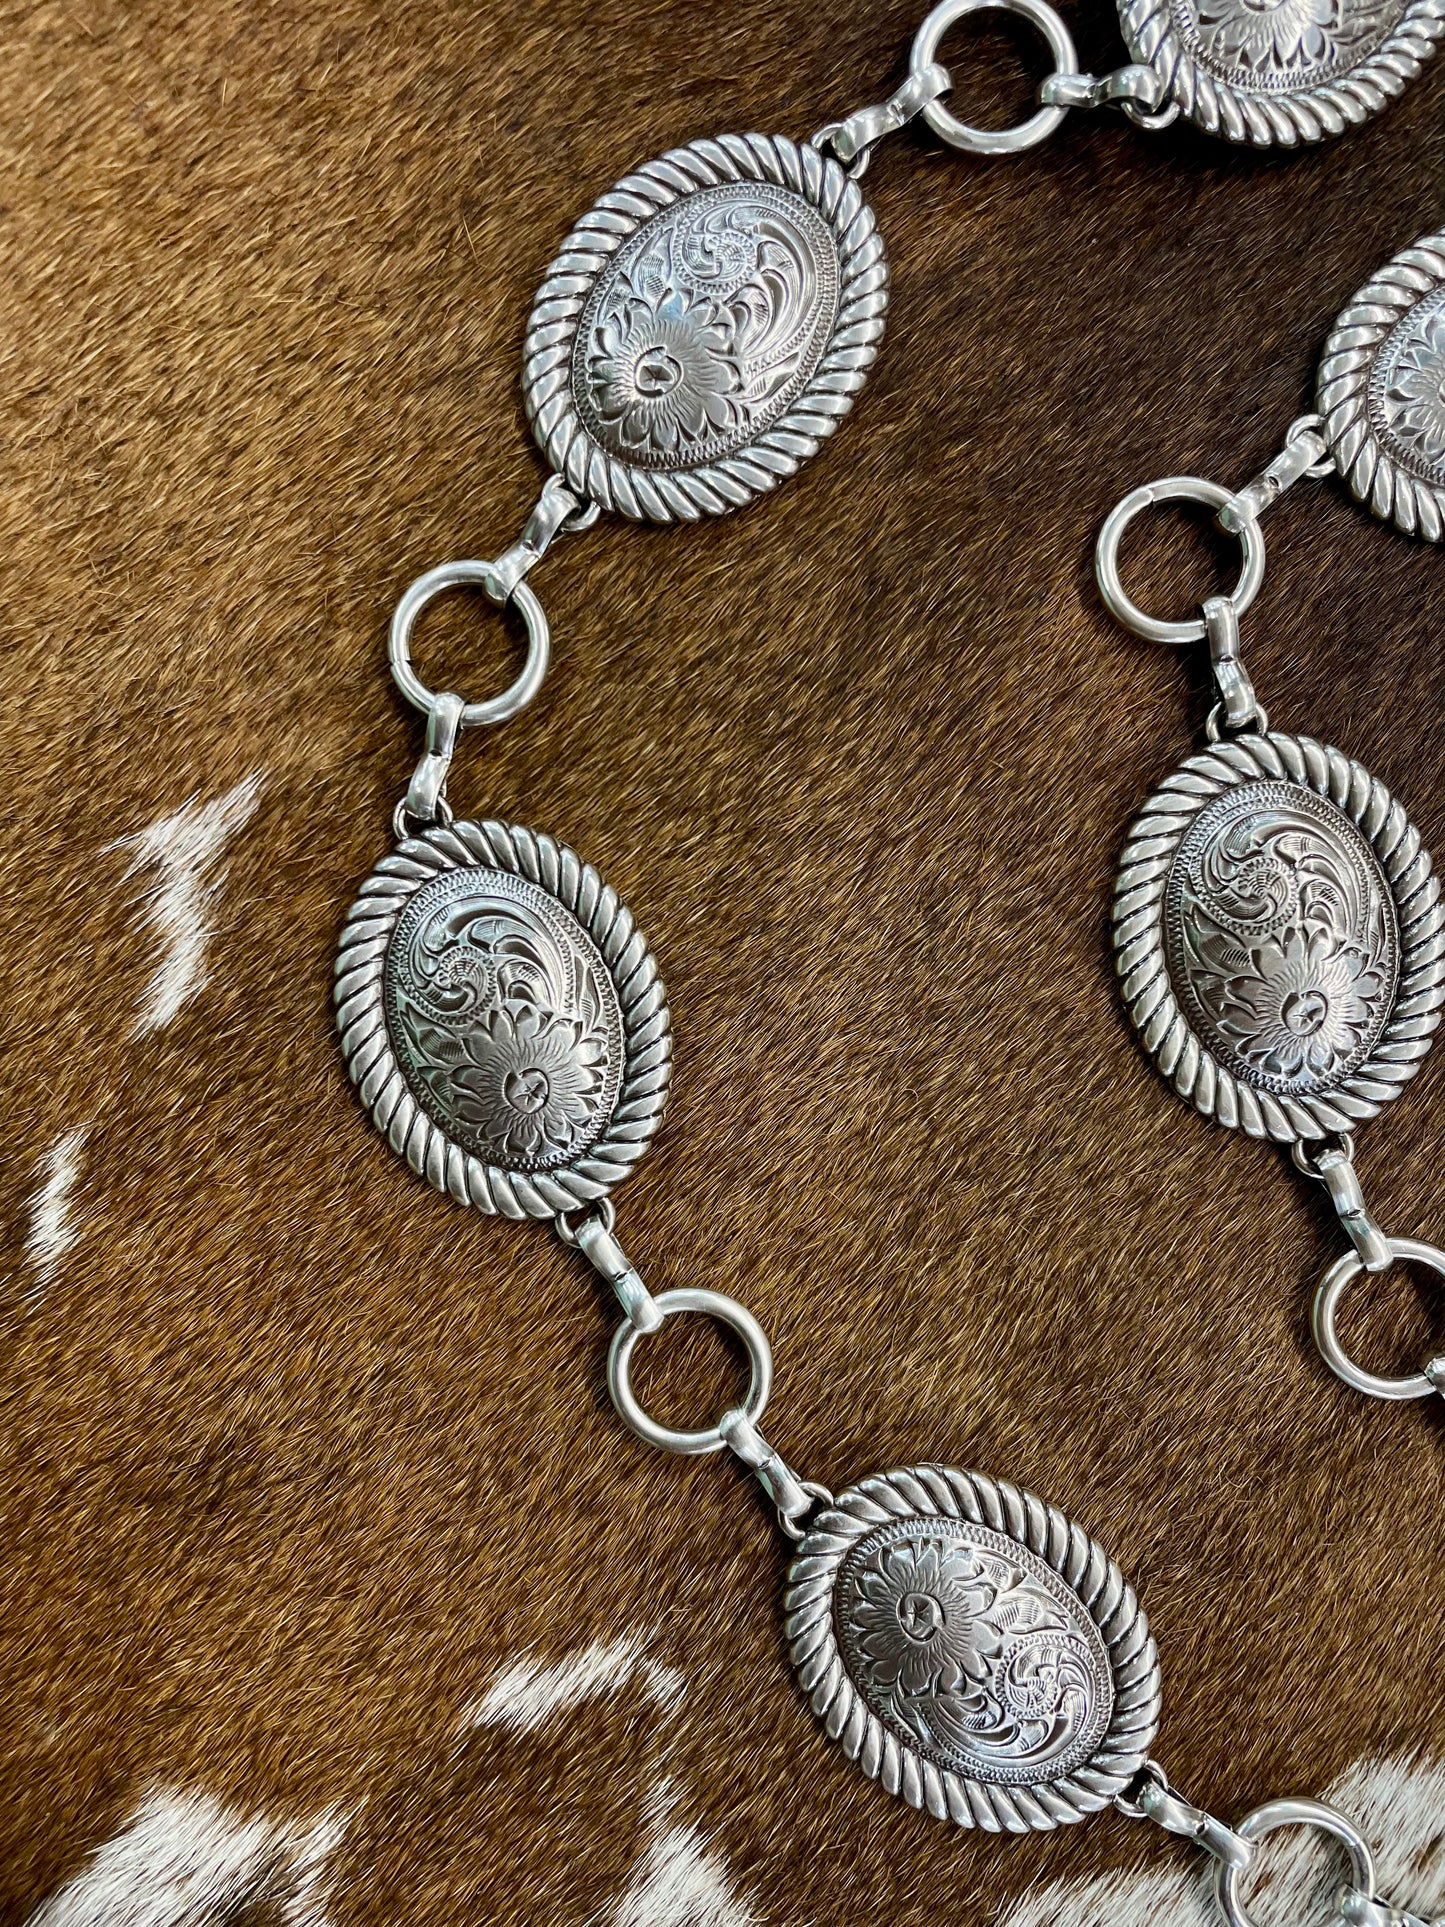 The Silver Etched Floral Concho Belt